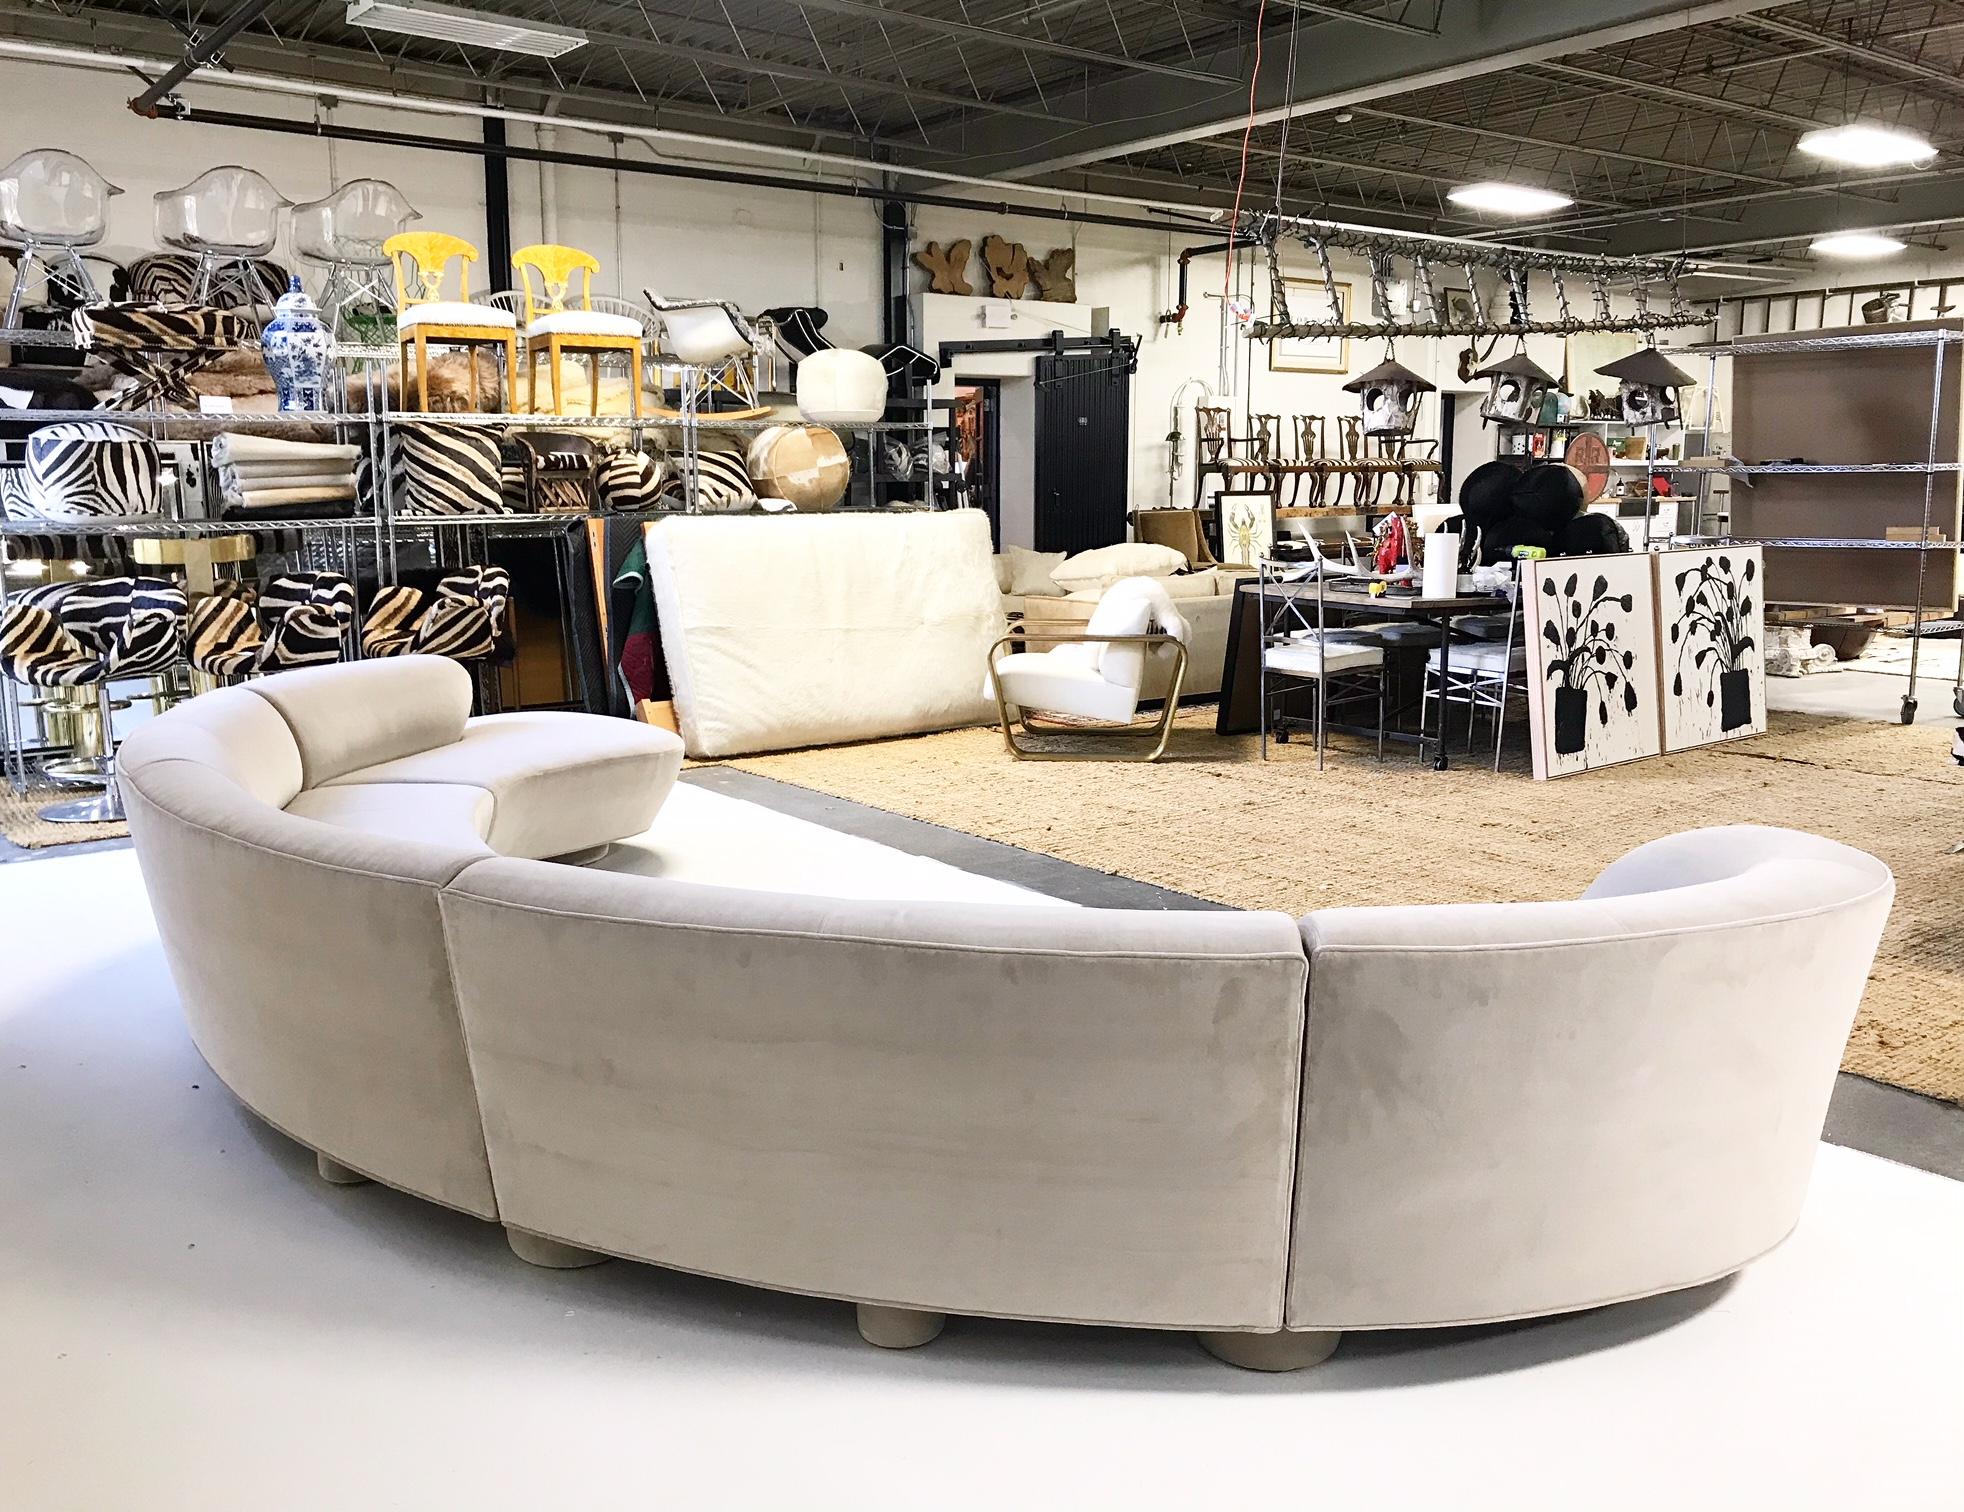 The classic sofa designs of Vladimir Kagan boast smooth, sensuous lines with an unparalleled flair. We were ecstatic when we got our hands on this 5-piece cloud sofa. It was in awesome condition, ready for the Forsyth touch. Our design team decided